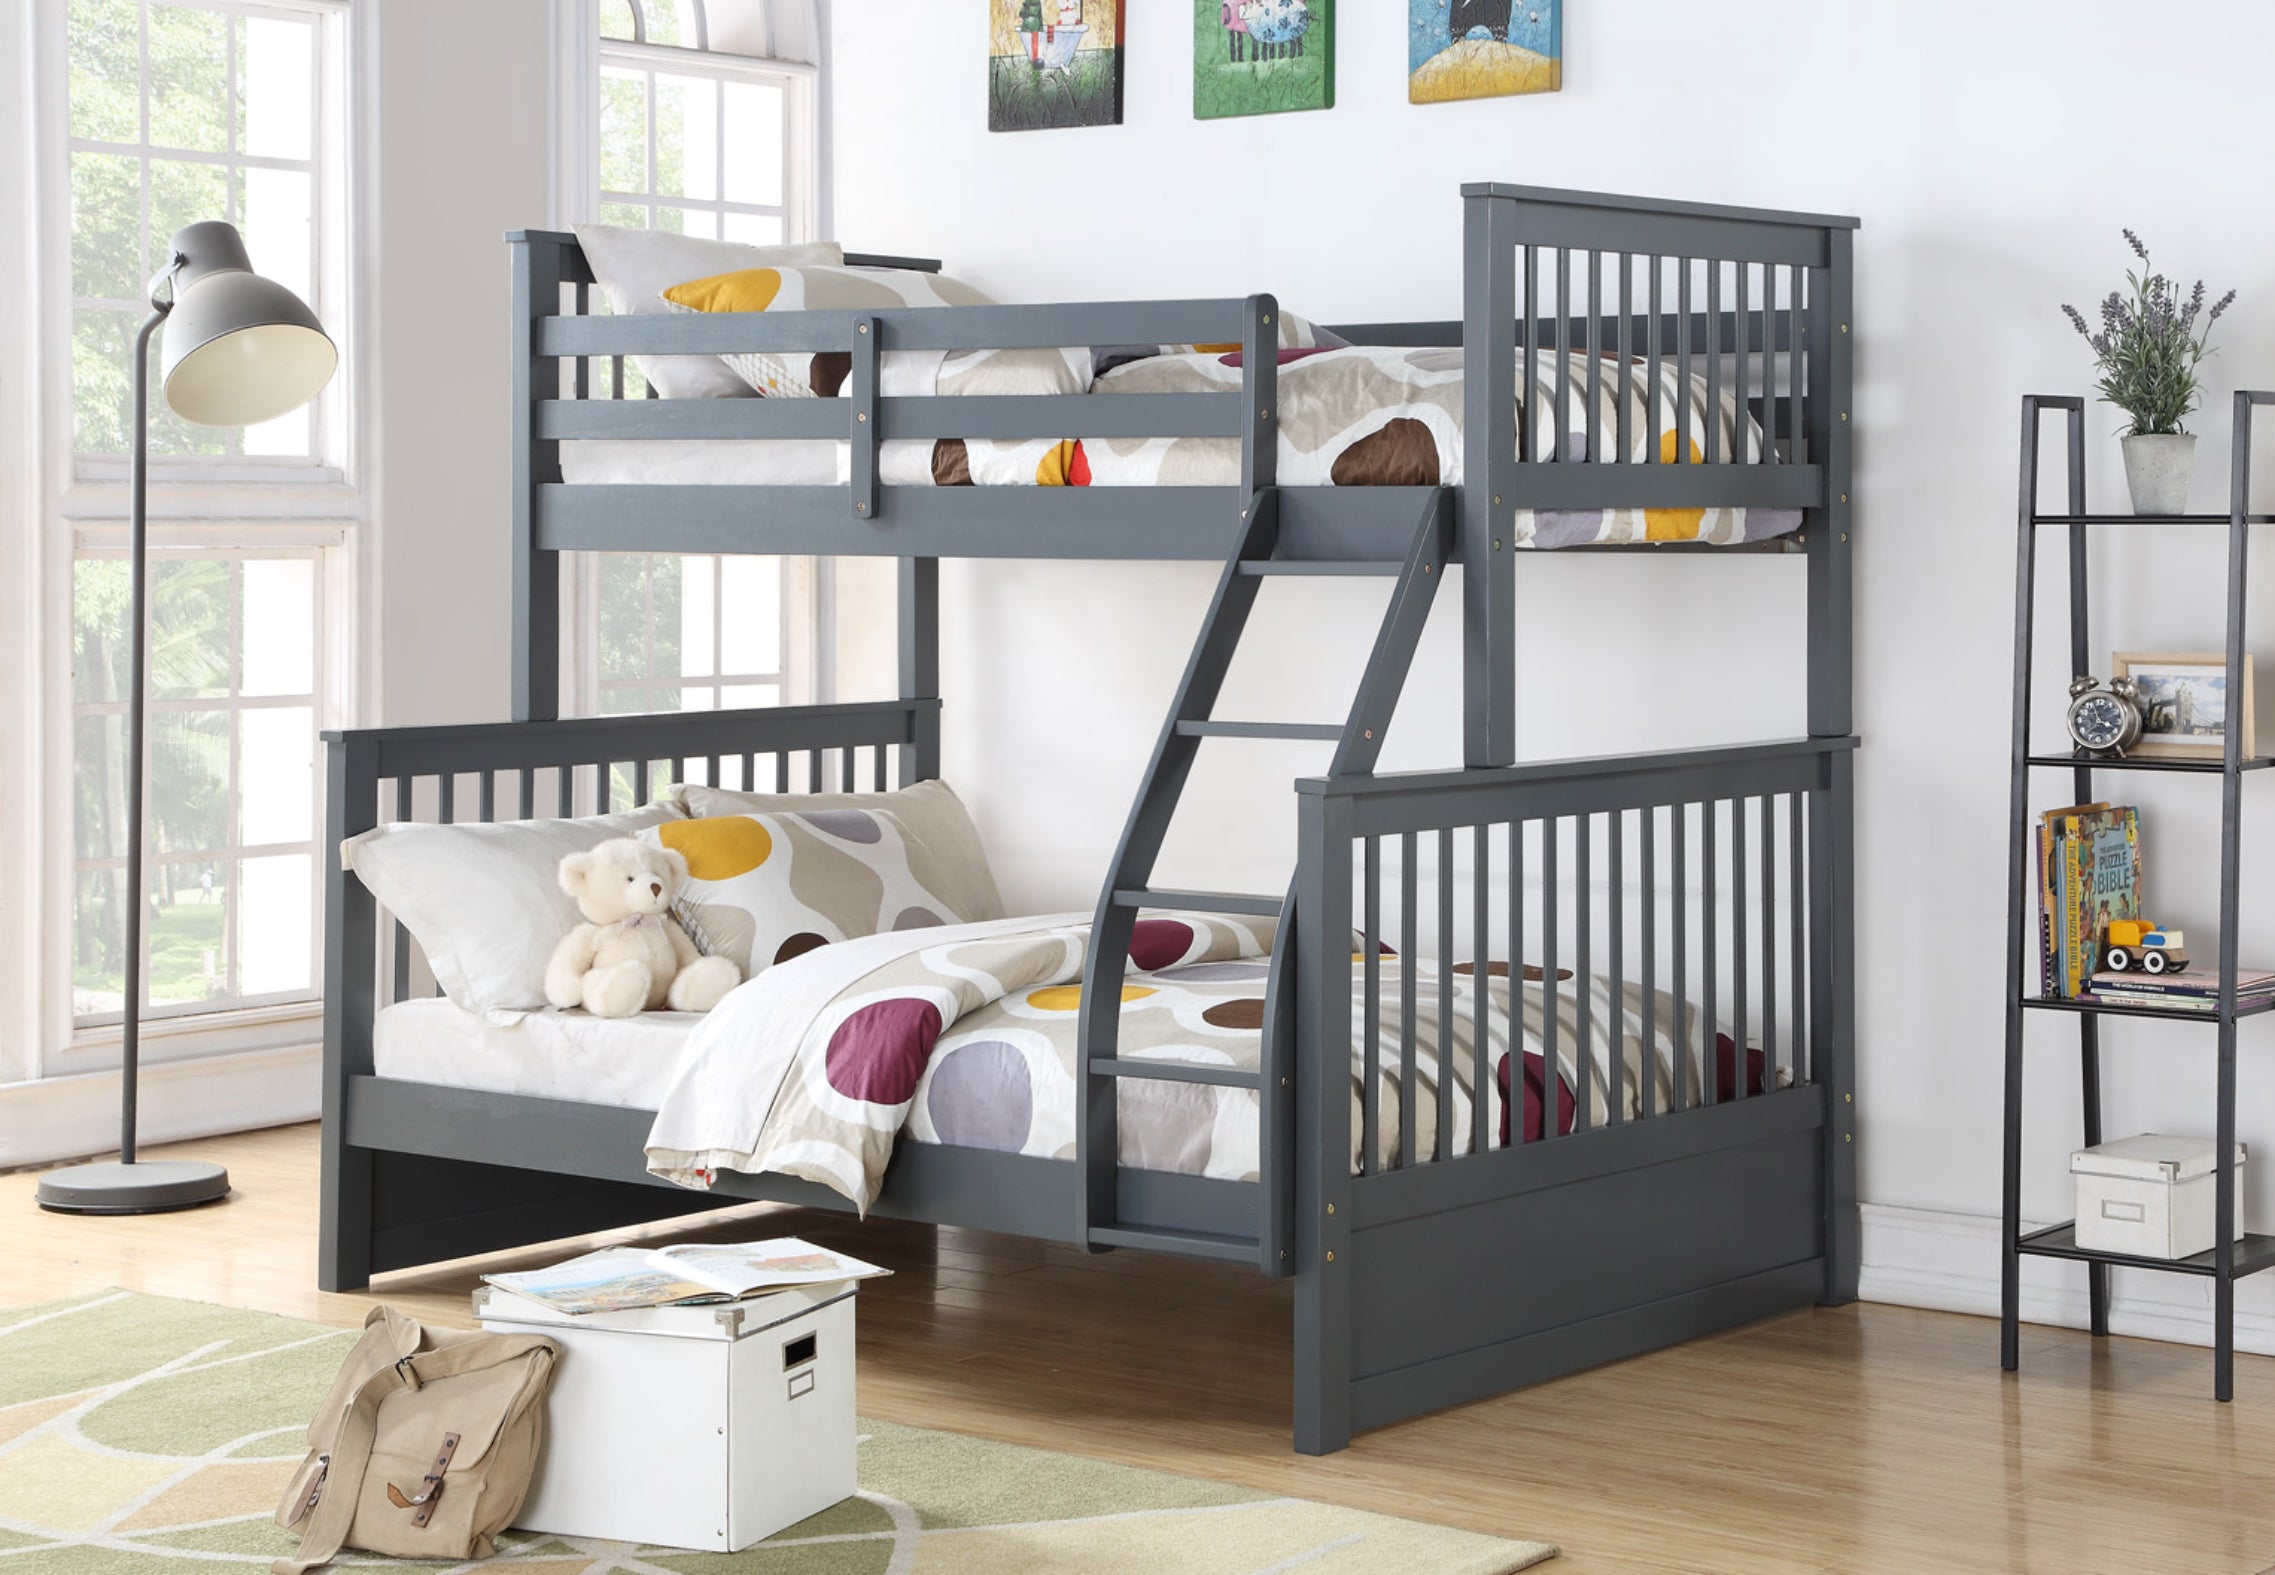 If-122 G Single Over Double Bunk Bed – Mr. Furniture & Mattress